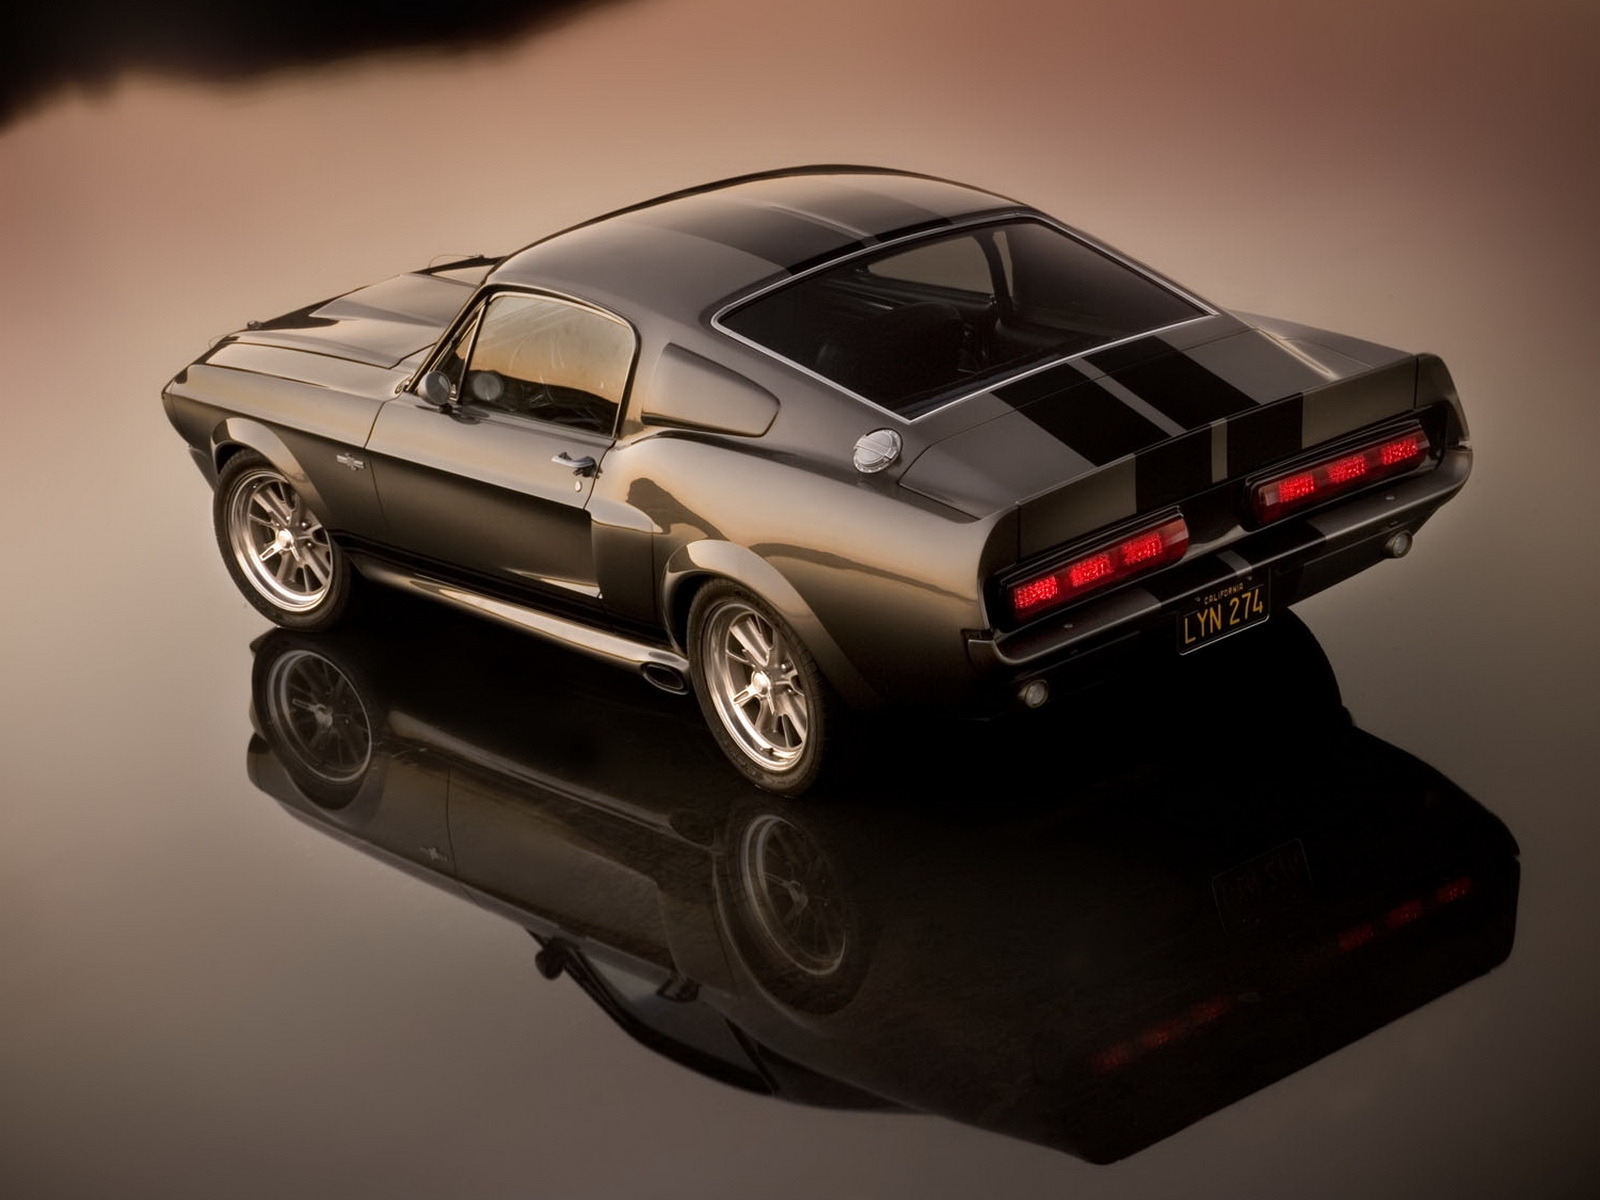 Mustang GT500 for 1600 x 1200 resolution